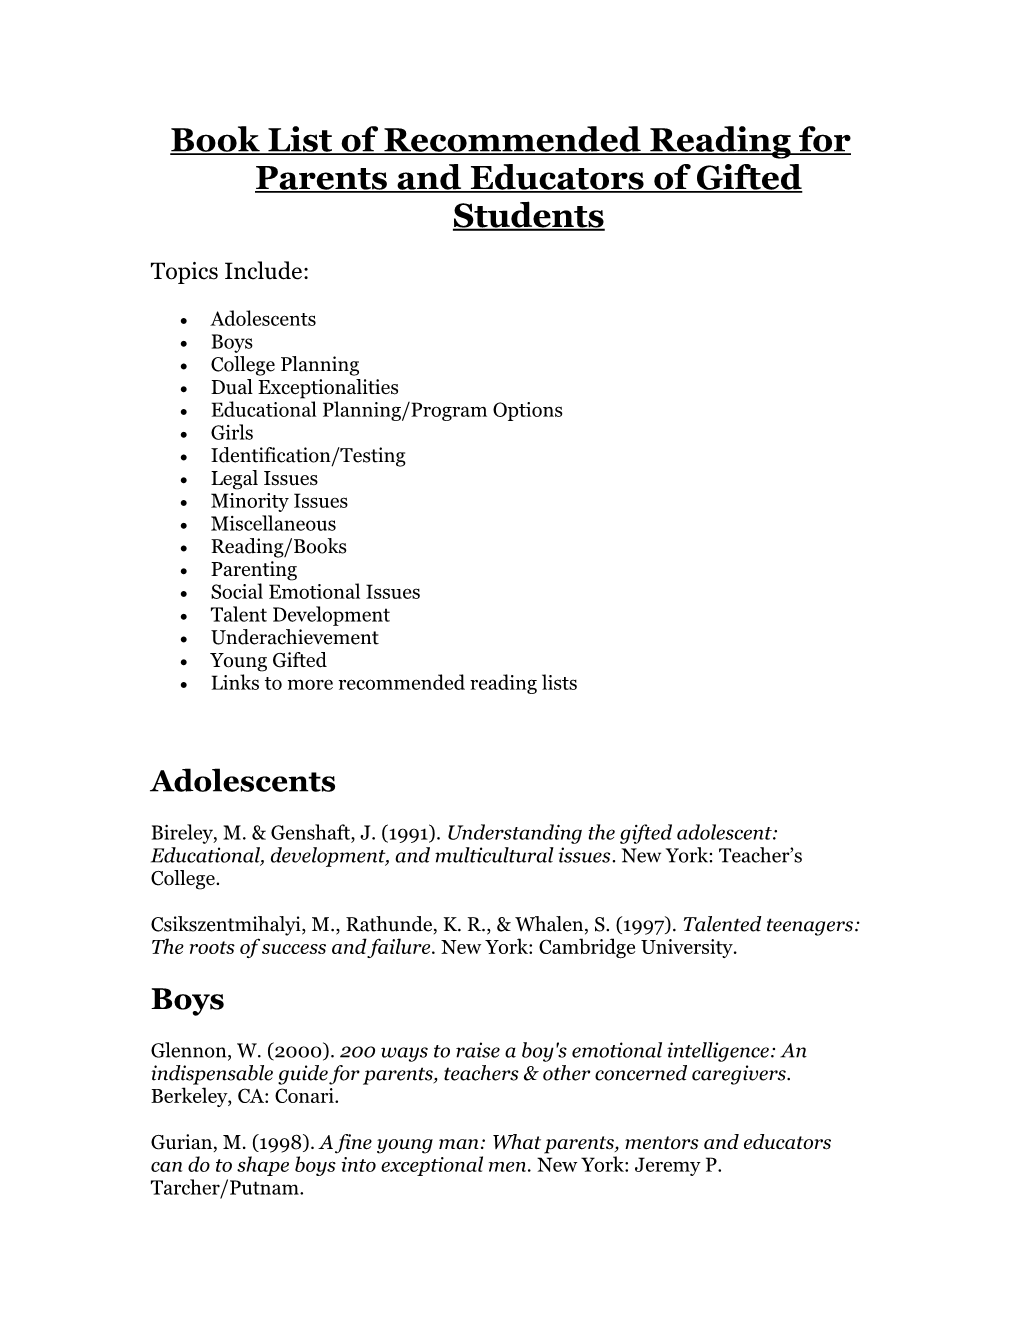 Book List of Recommended Reading for Parents and Educators of Gifted Students